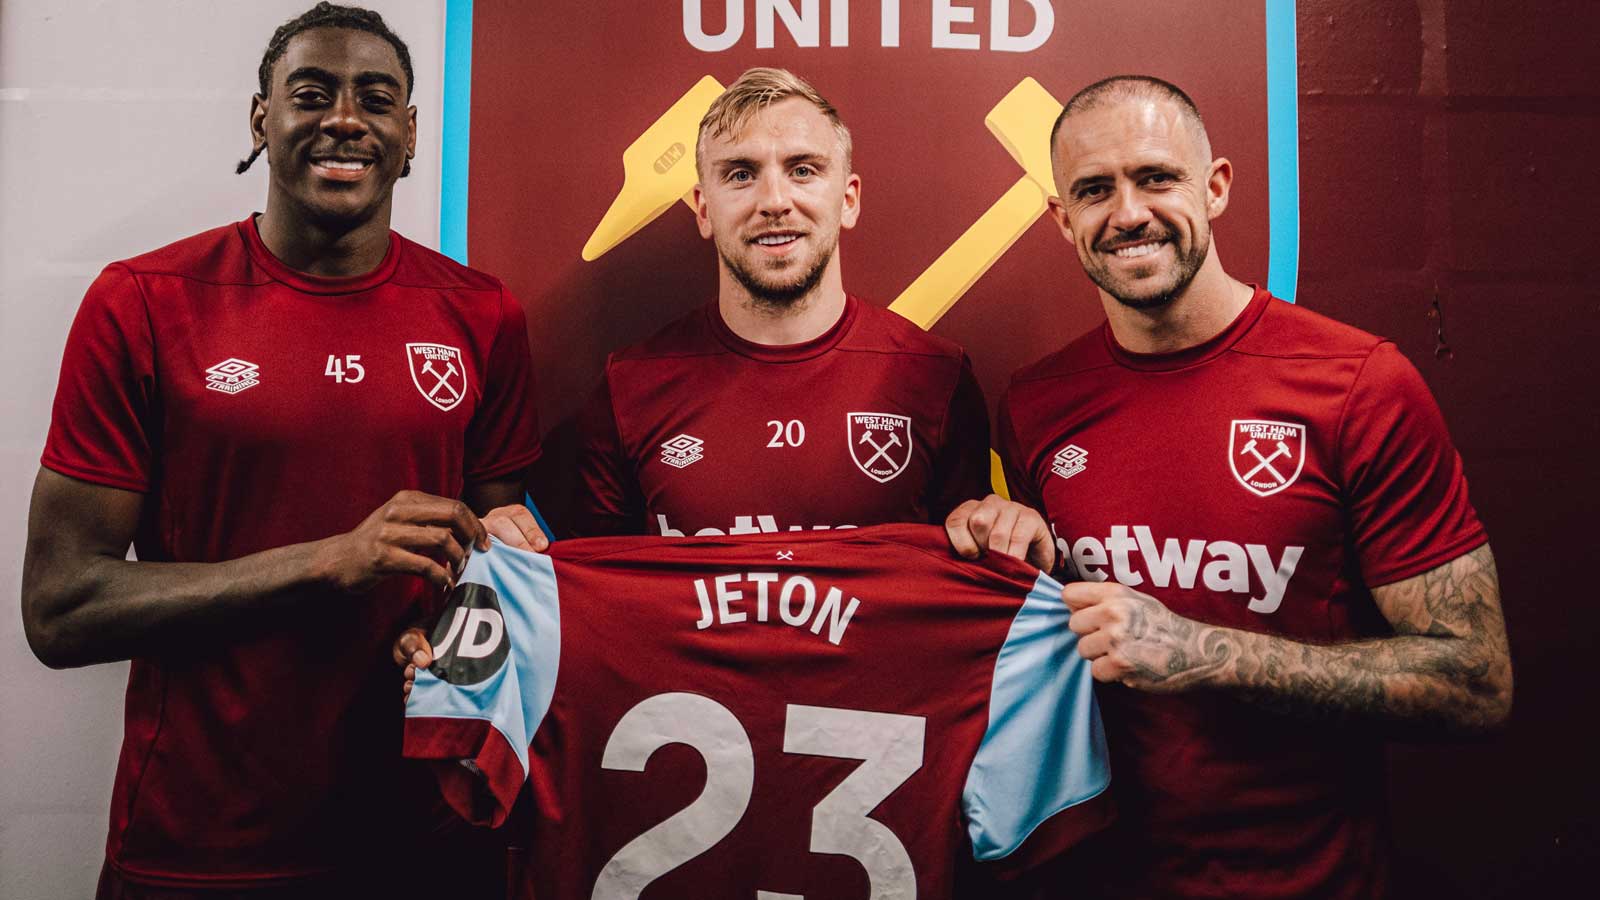 Divin Mubama, Jarrod Bowen and Danny Ings hold a West Ham United shirt with 'Jeton 23' printed on the back